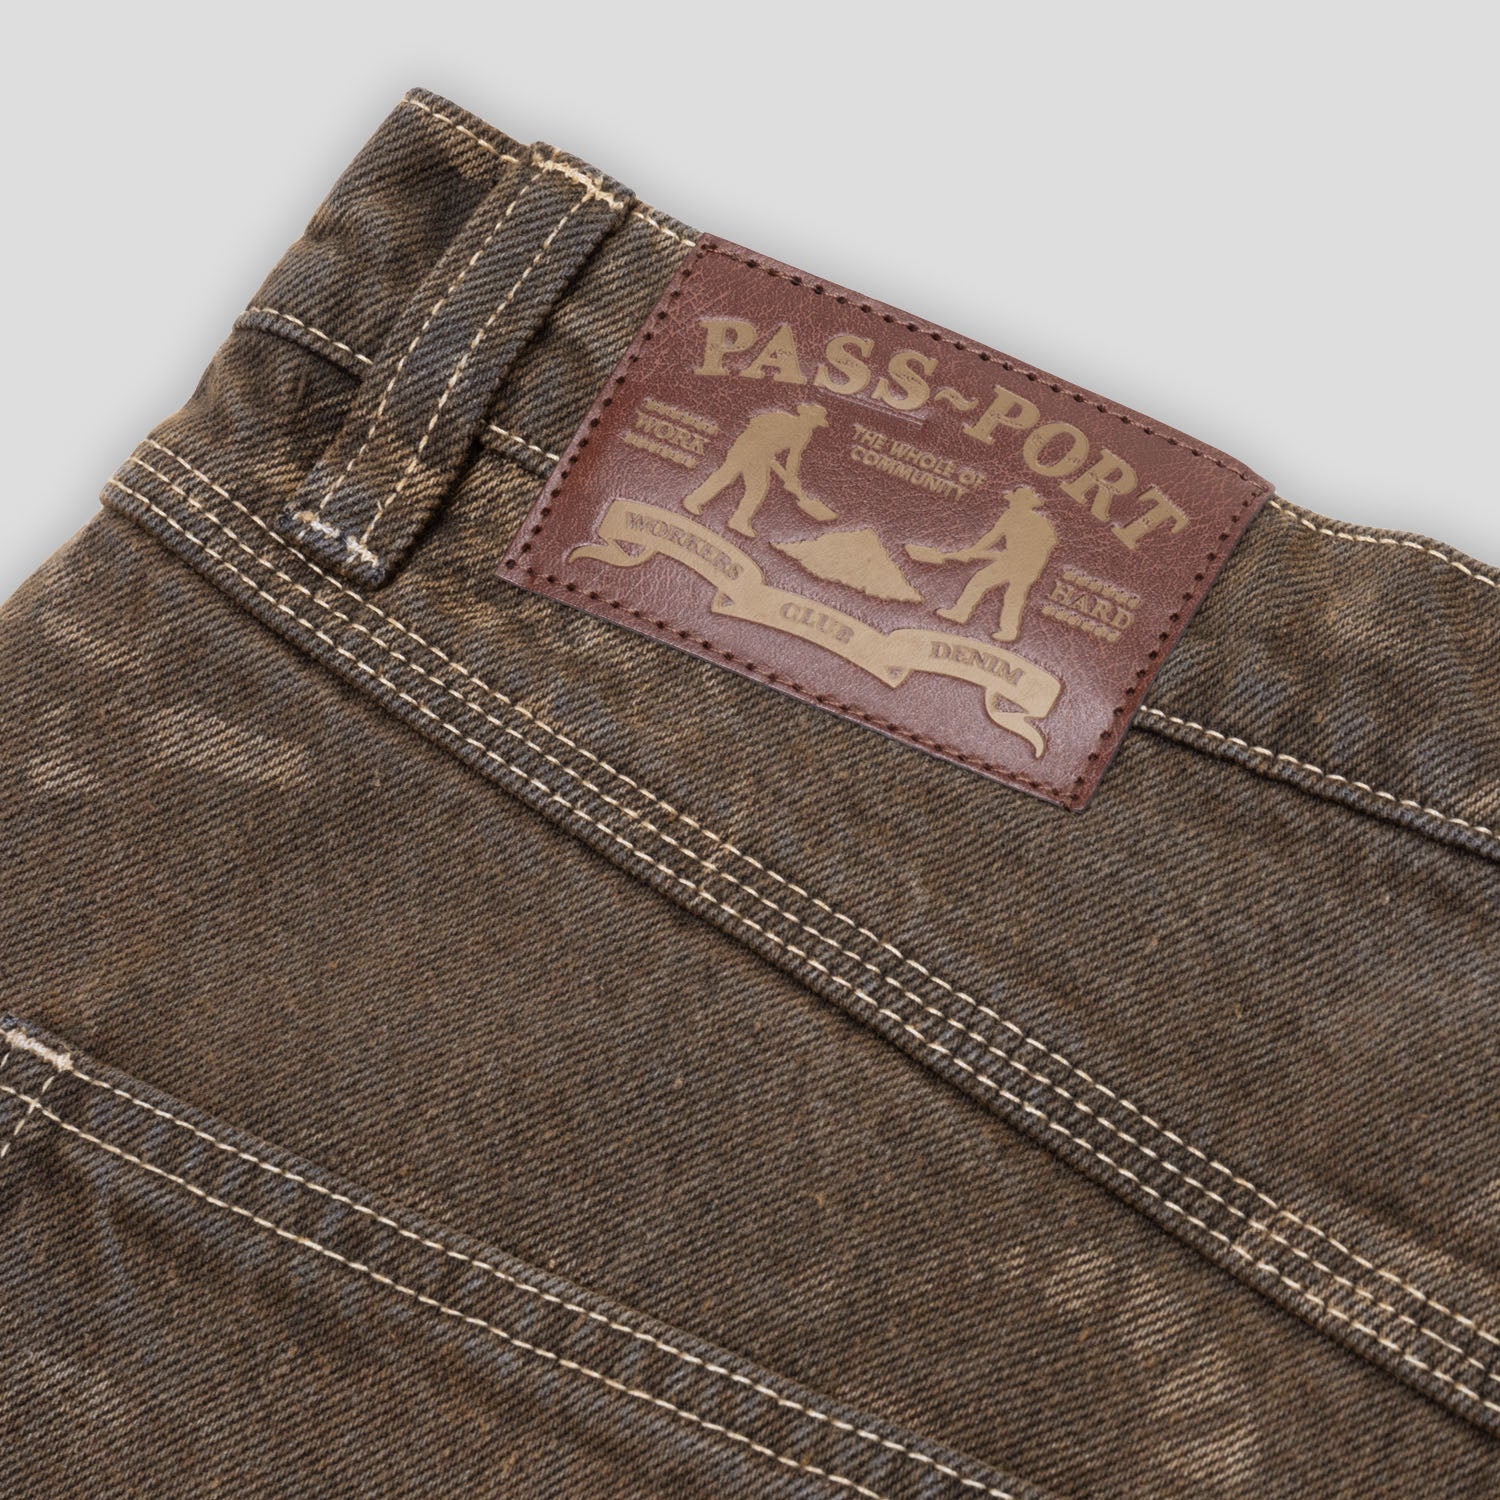 Pass~Port Workers Club Denim Short - Laser Etched Trinkets Over-Dye Brown